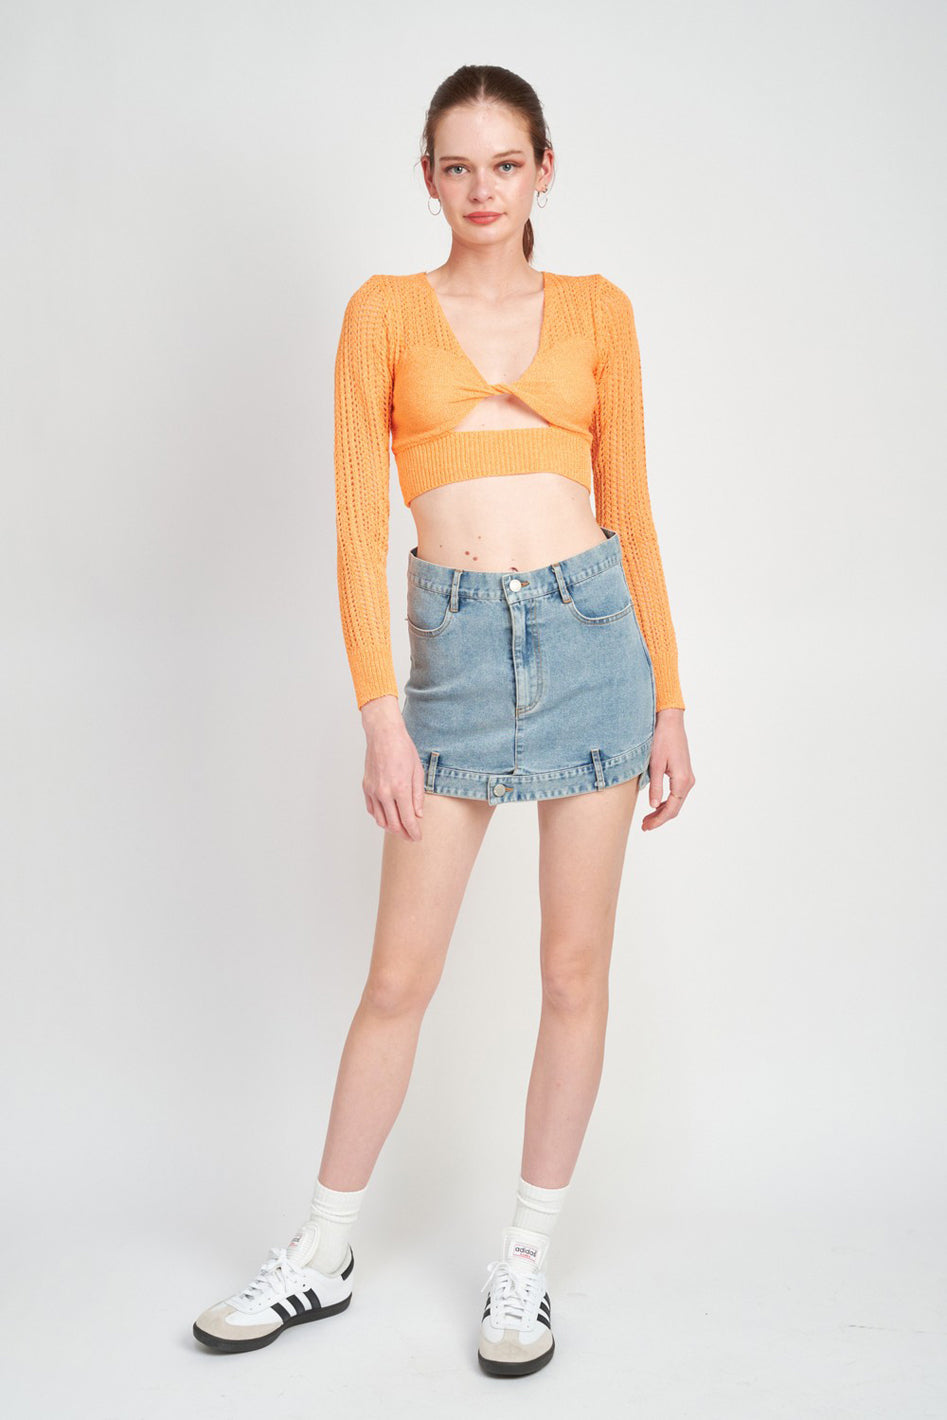 Crochet Cropped Top With Twist Front Detail - Azoroh